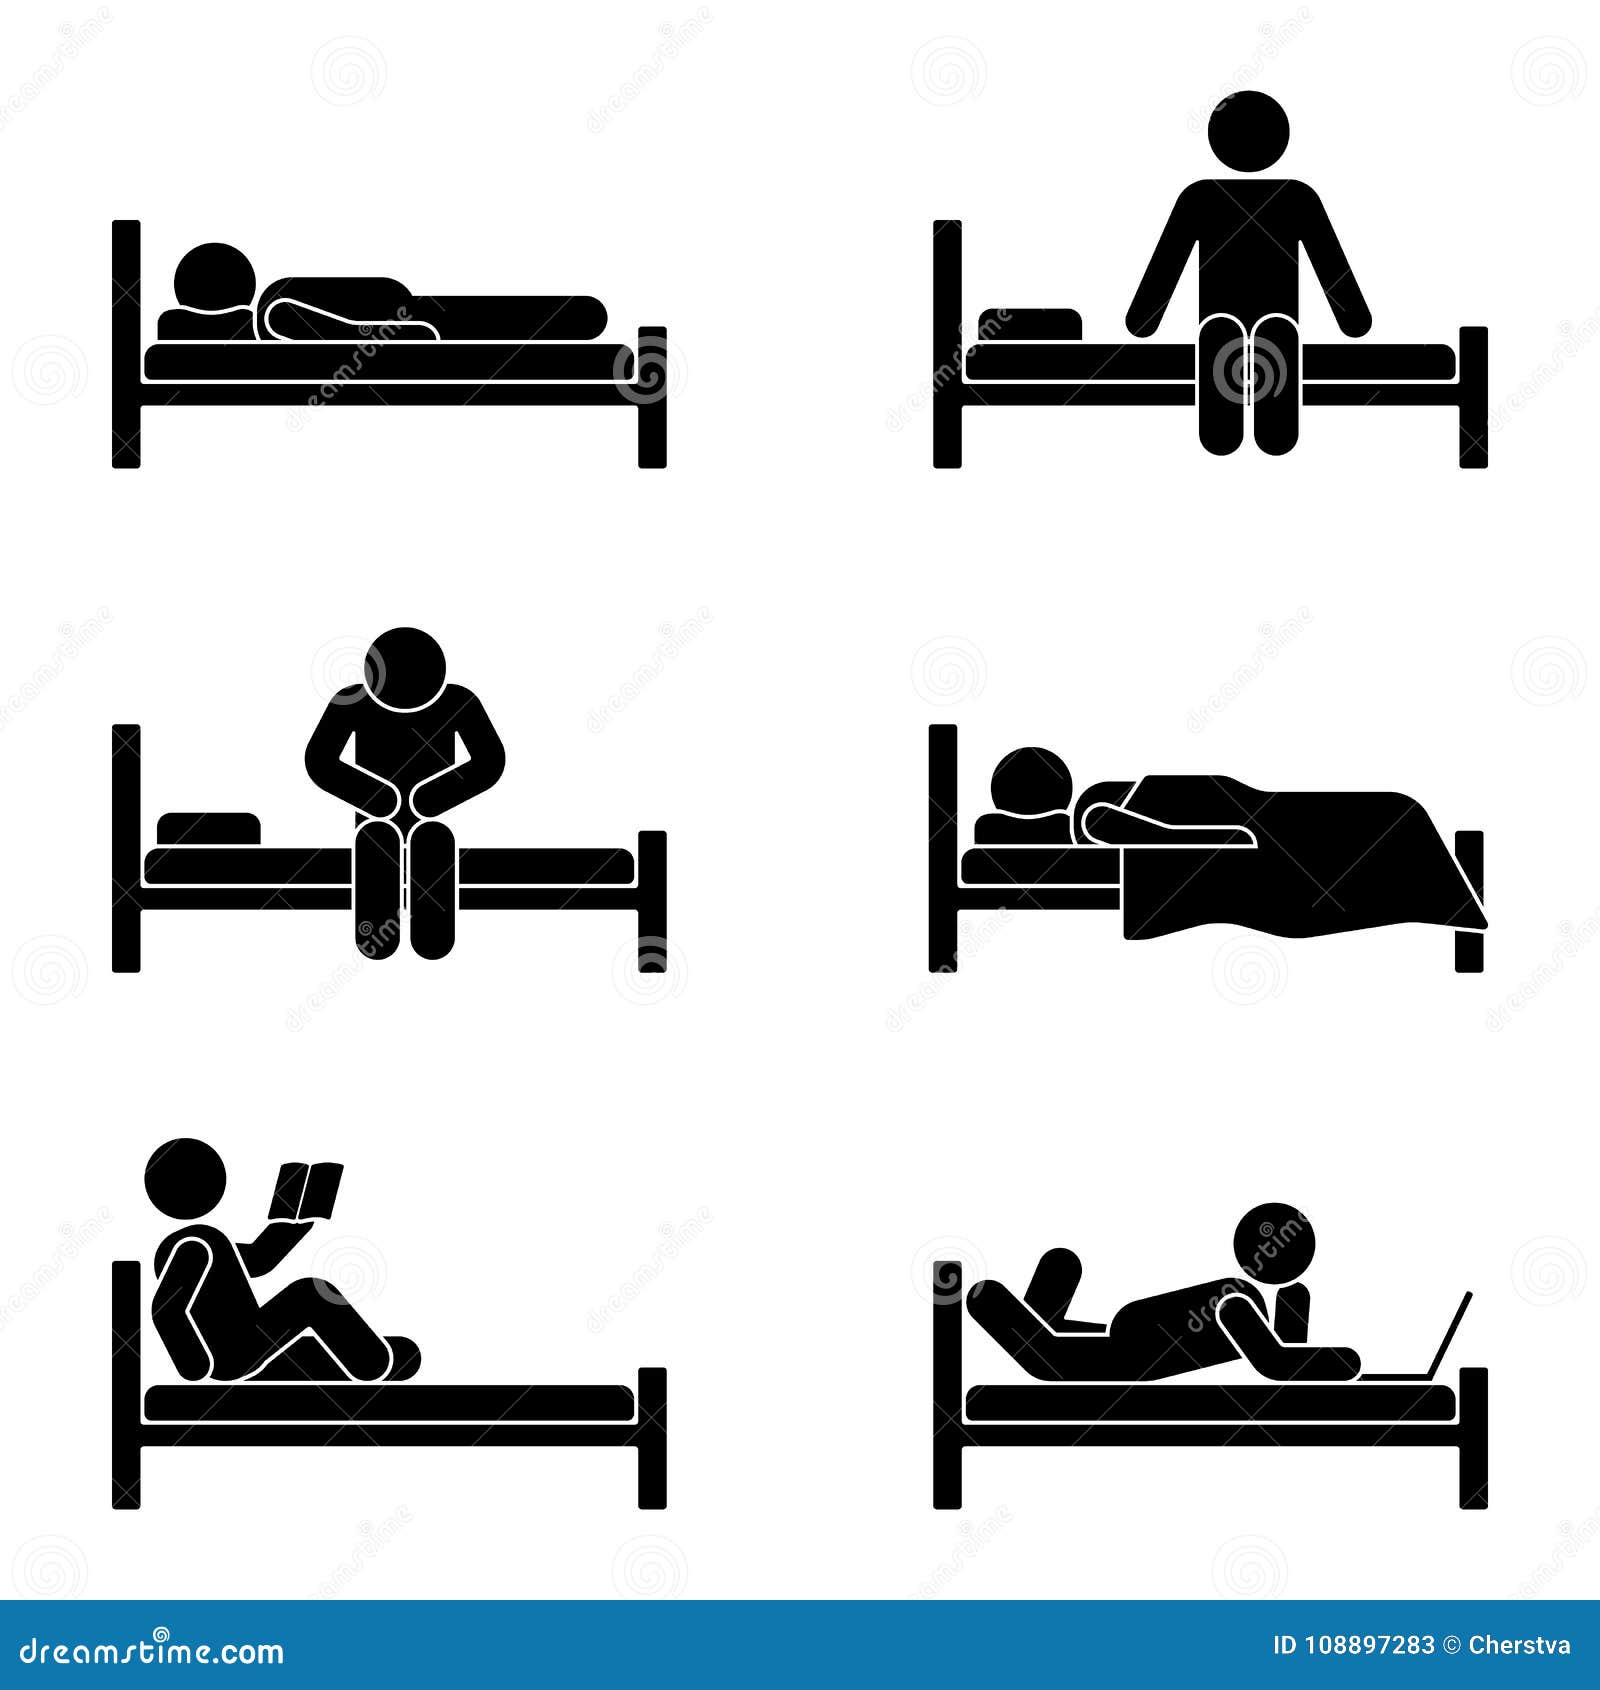 stick figure different position in bed.   of dreaming, sitting, sleeping person icon  sign set pictogram.